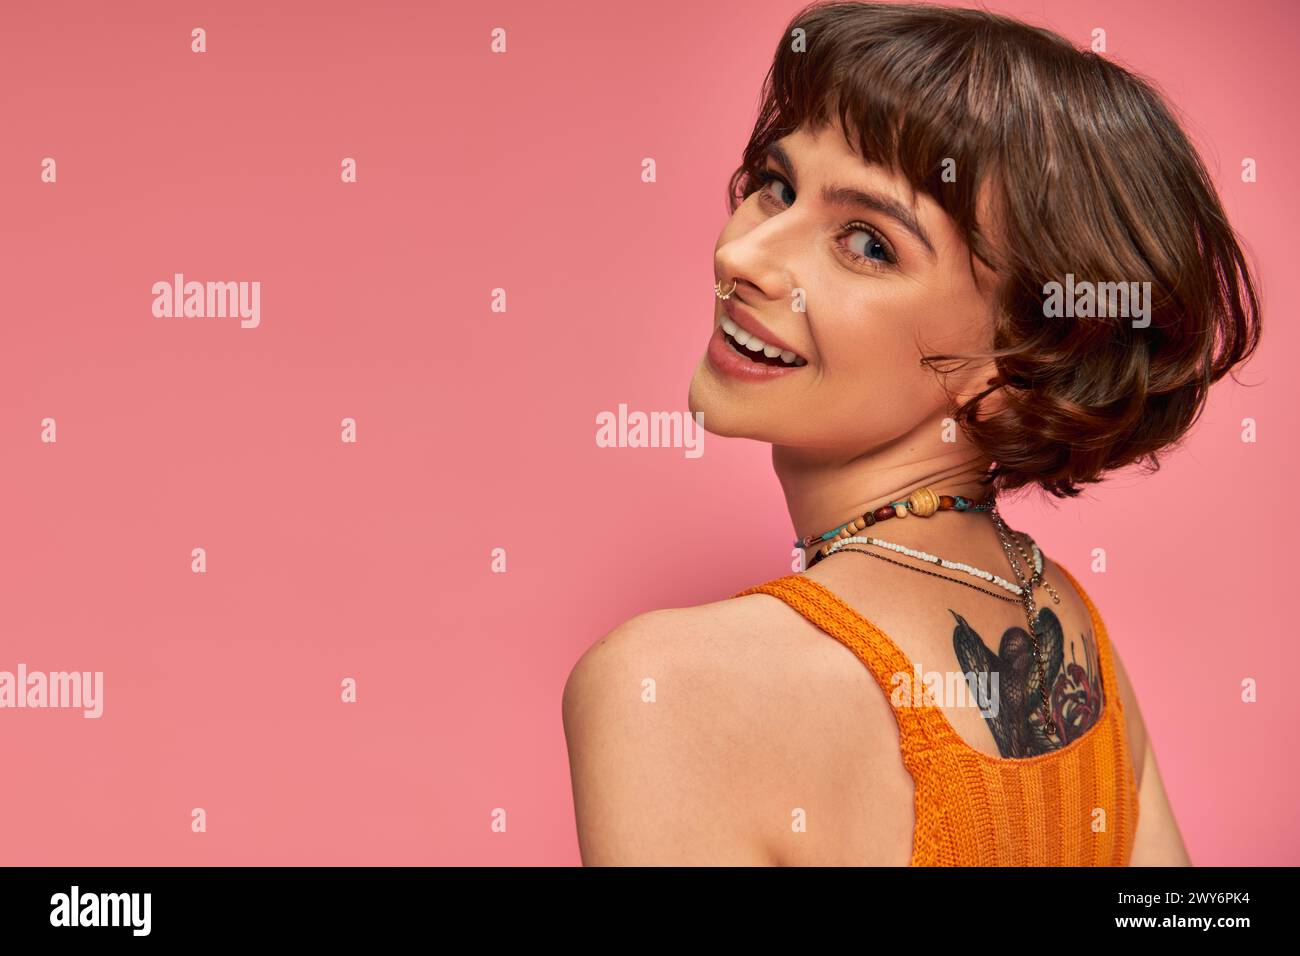 happy tattooed woman in 20s with nose piercing and brunette short hair smiling on pink background Stock Photo